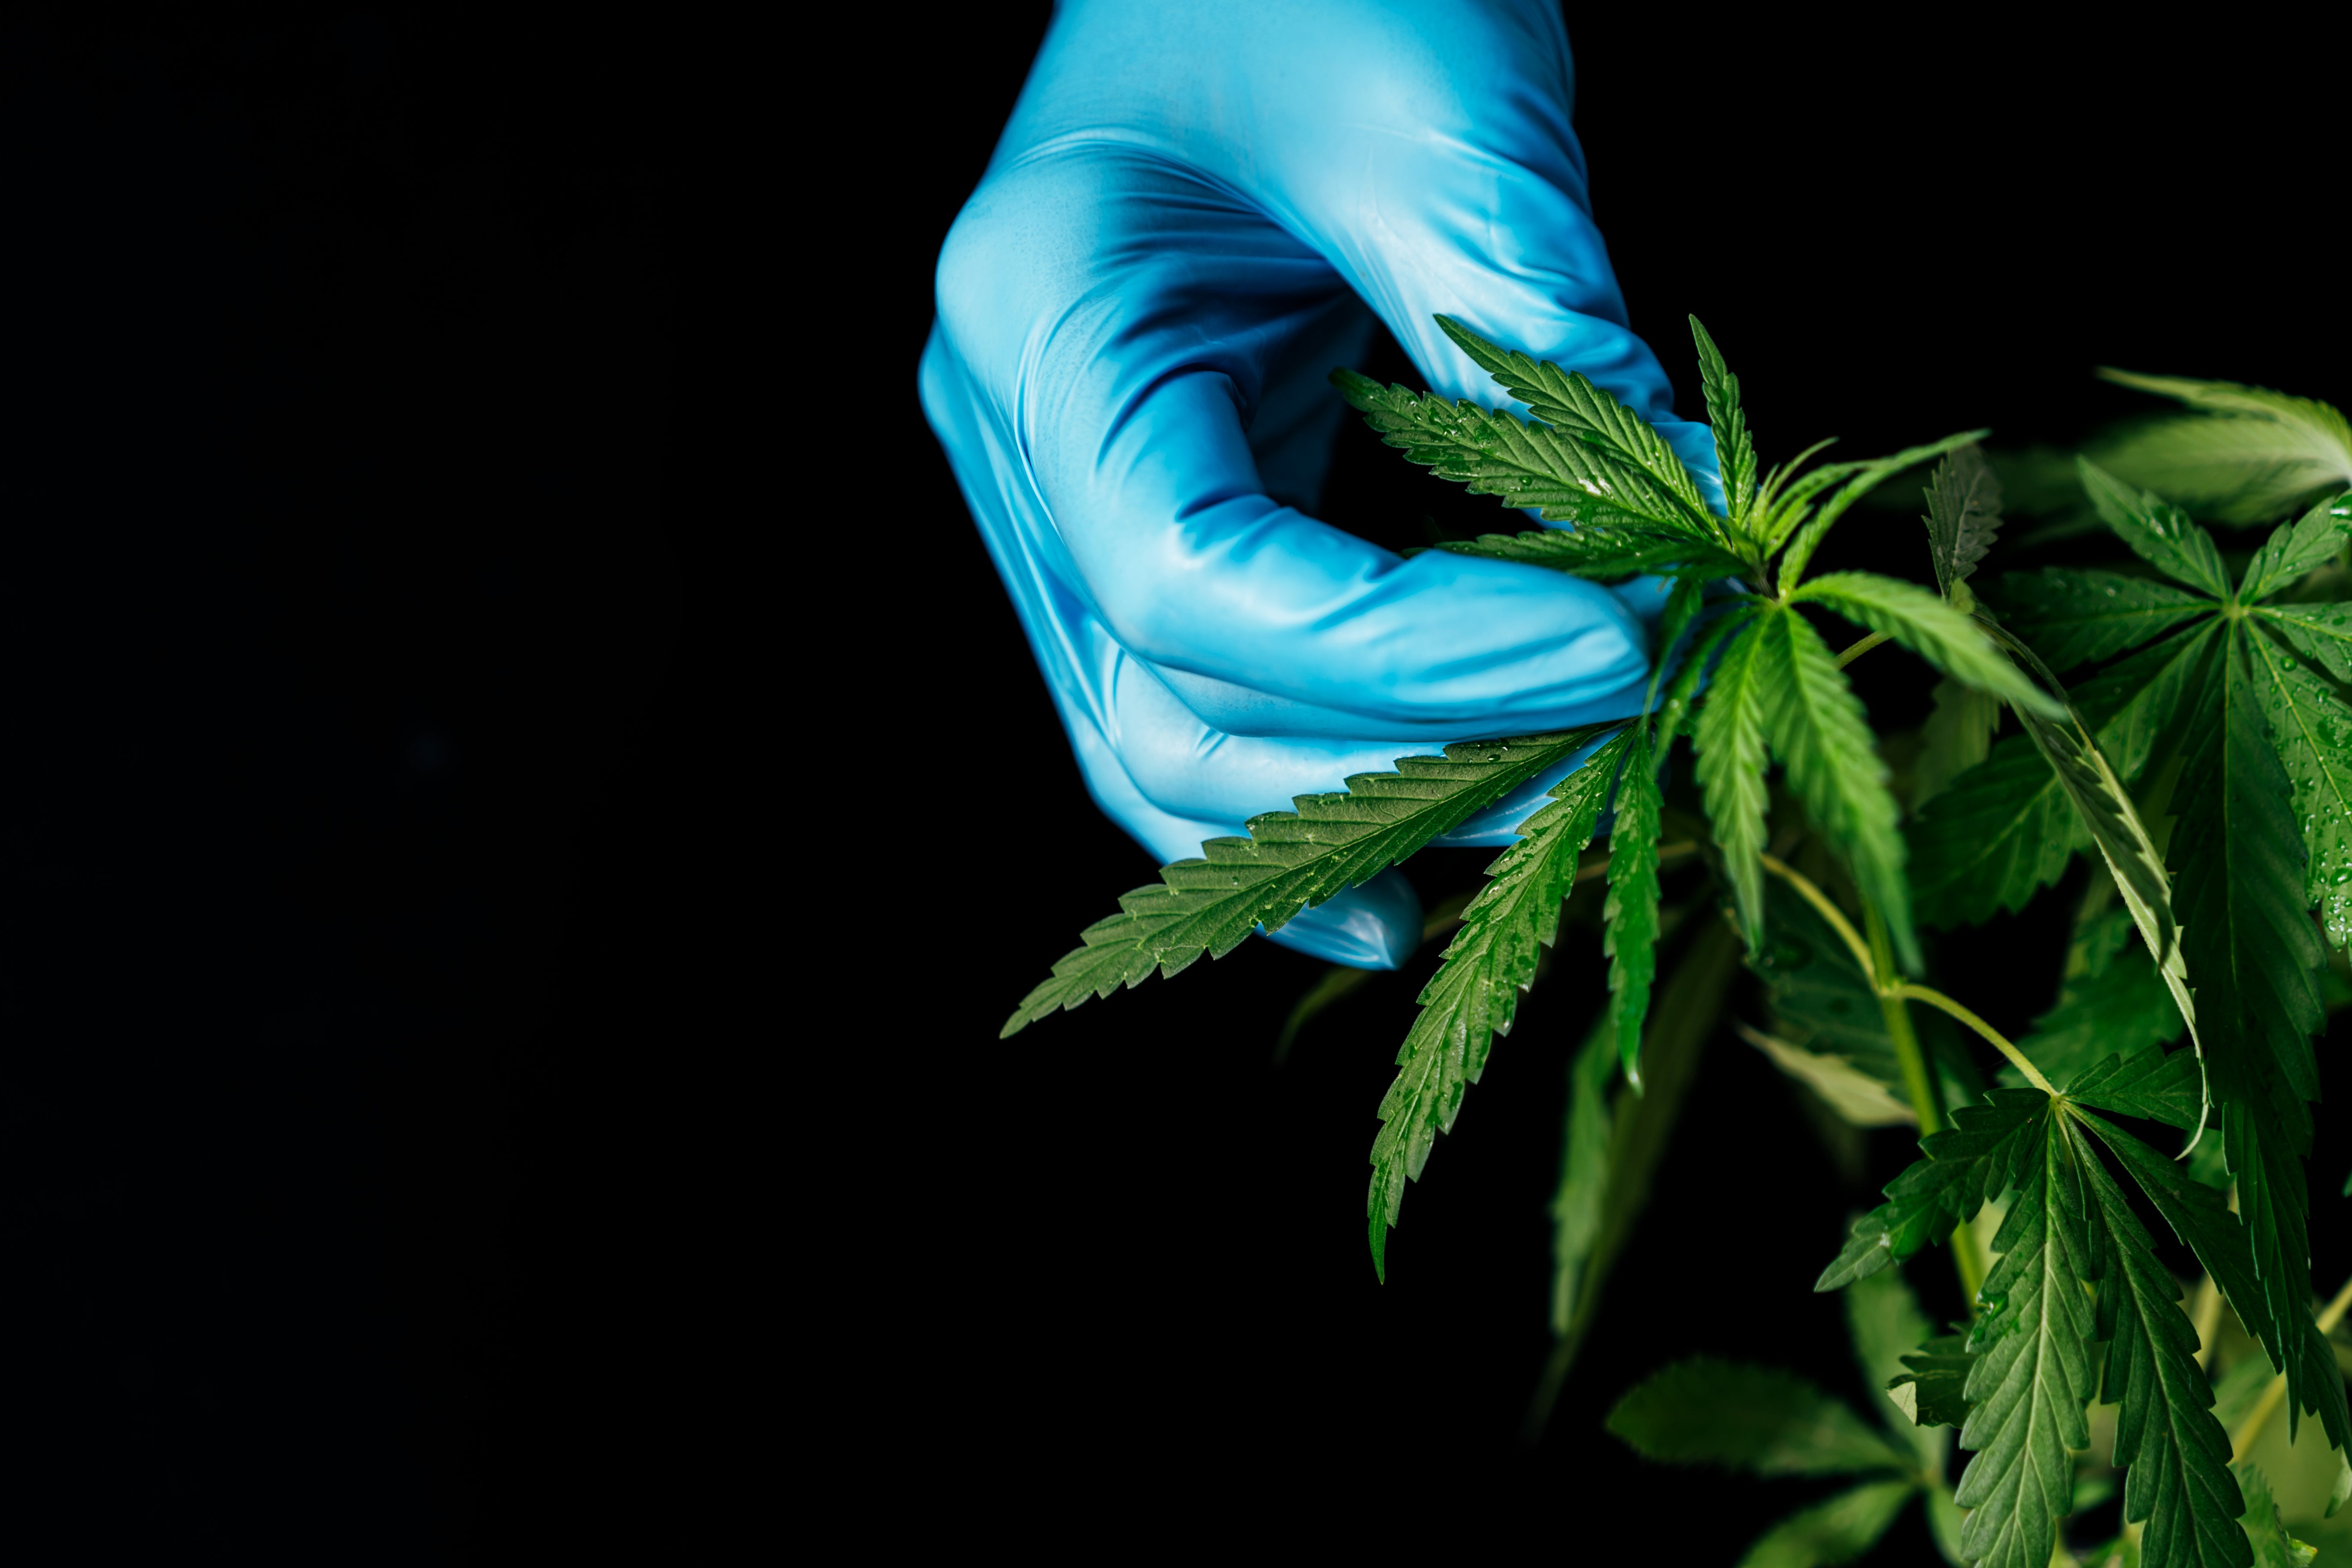 Someone wearing a blue glove touches the leaves of a cannabis flower in a dark room.